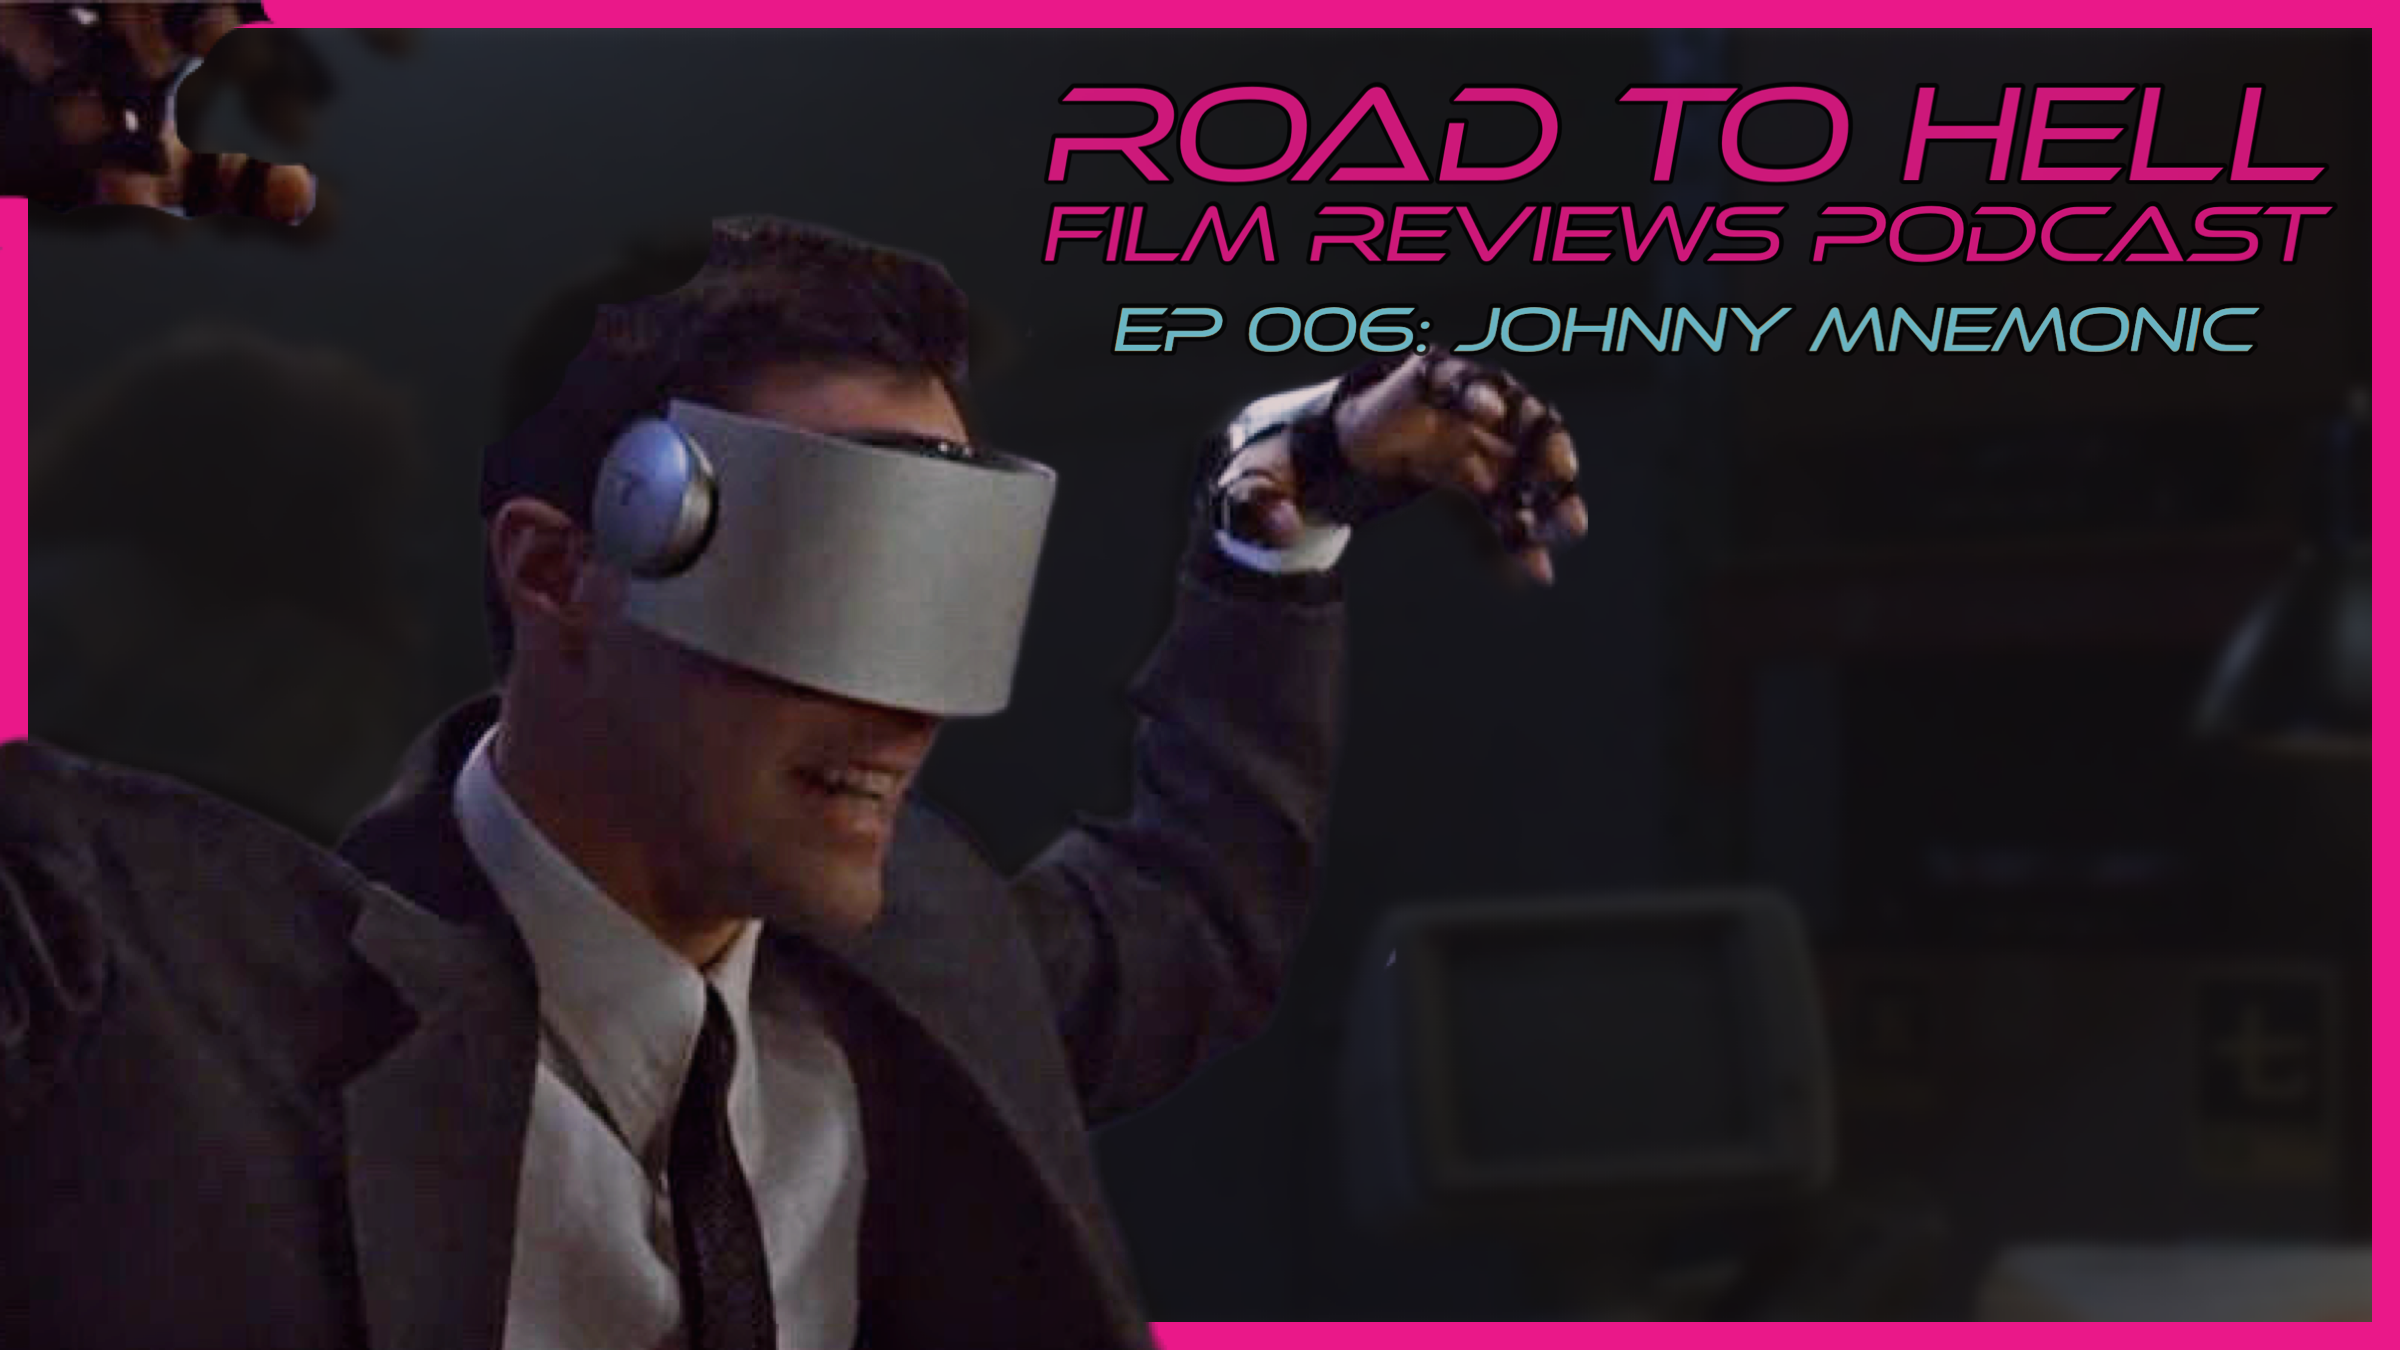 Johnny Mnemonic Review: Road To Hell Film Reviews Episode 006